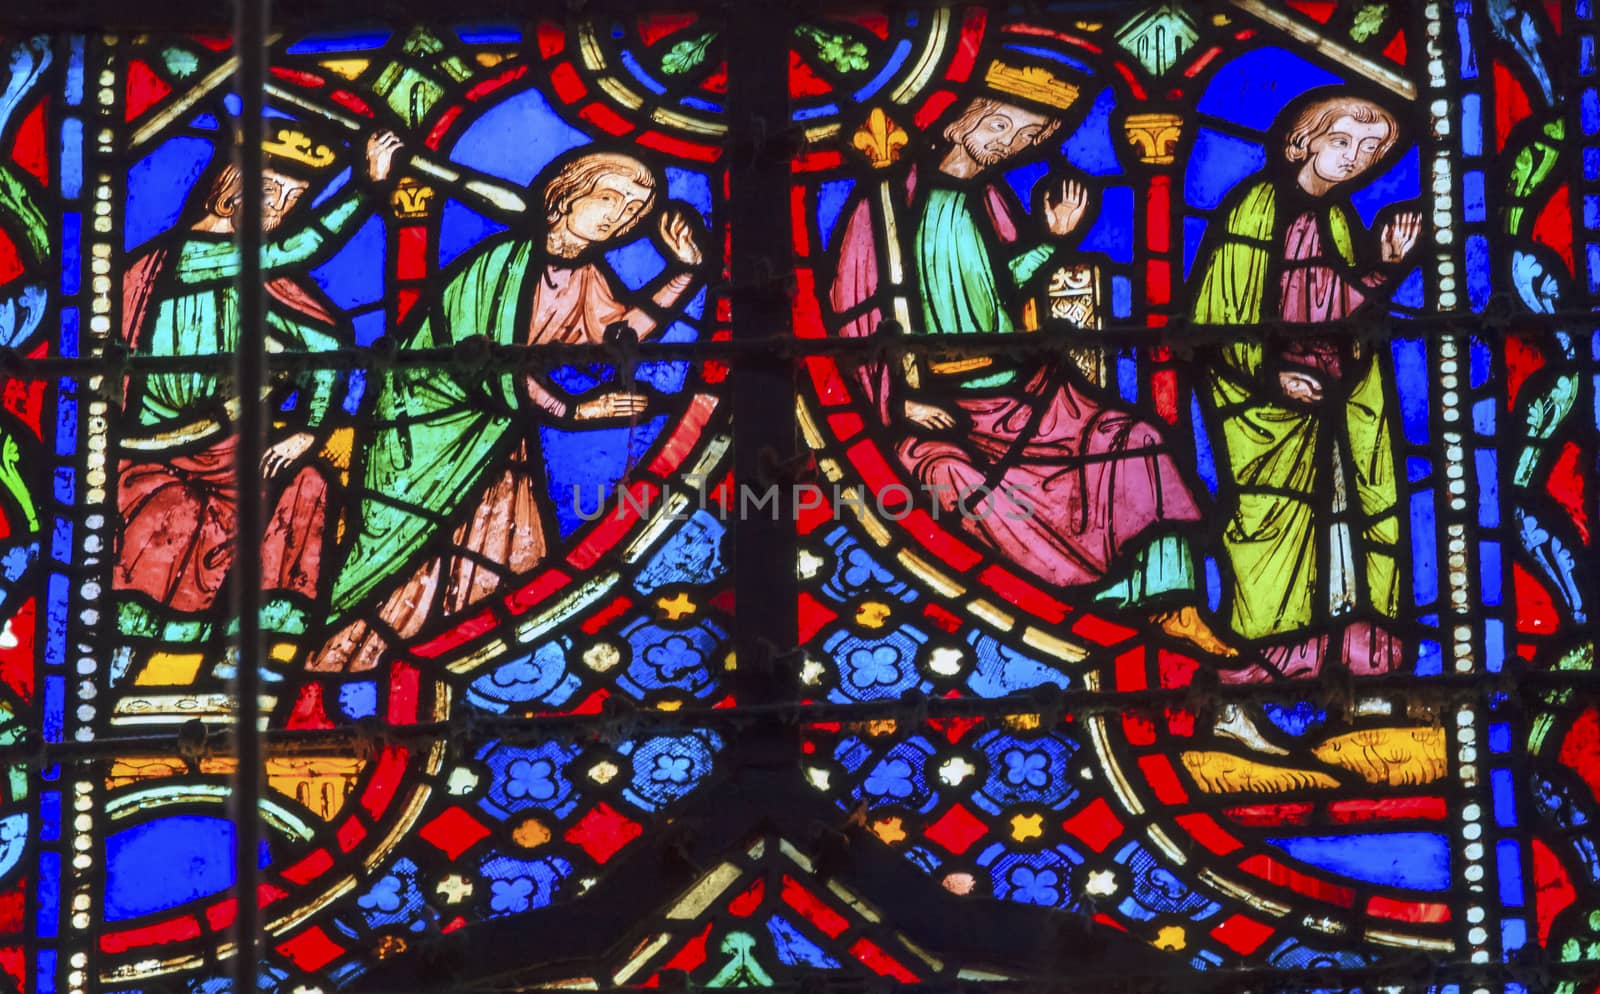 King Killing Medieval Life Stained Glass Saint Chapelle Paris France.  Saint King Louis 9th created Sainte Chapelle in 1248 to house Christian relics, including Christ's Crown of Thorns.  Stained Glass created in the 13th Century and shows various biblical stories along with stories from 1200s.